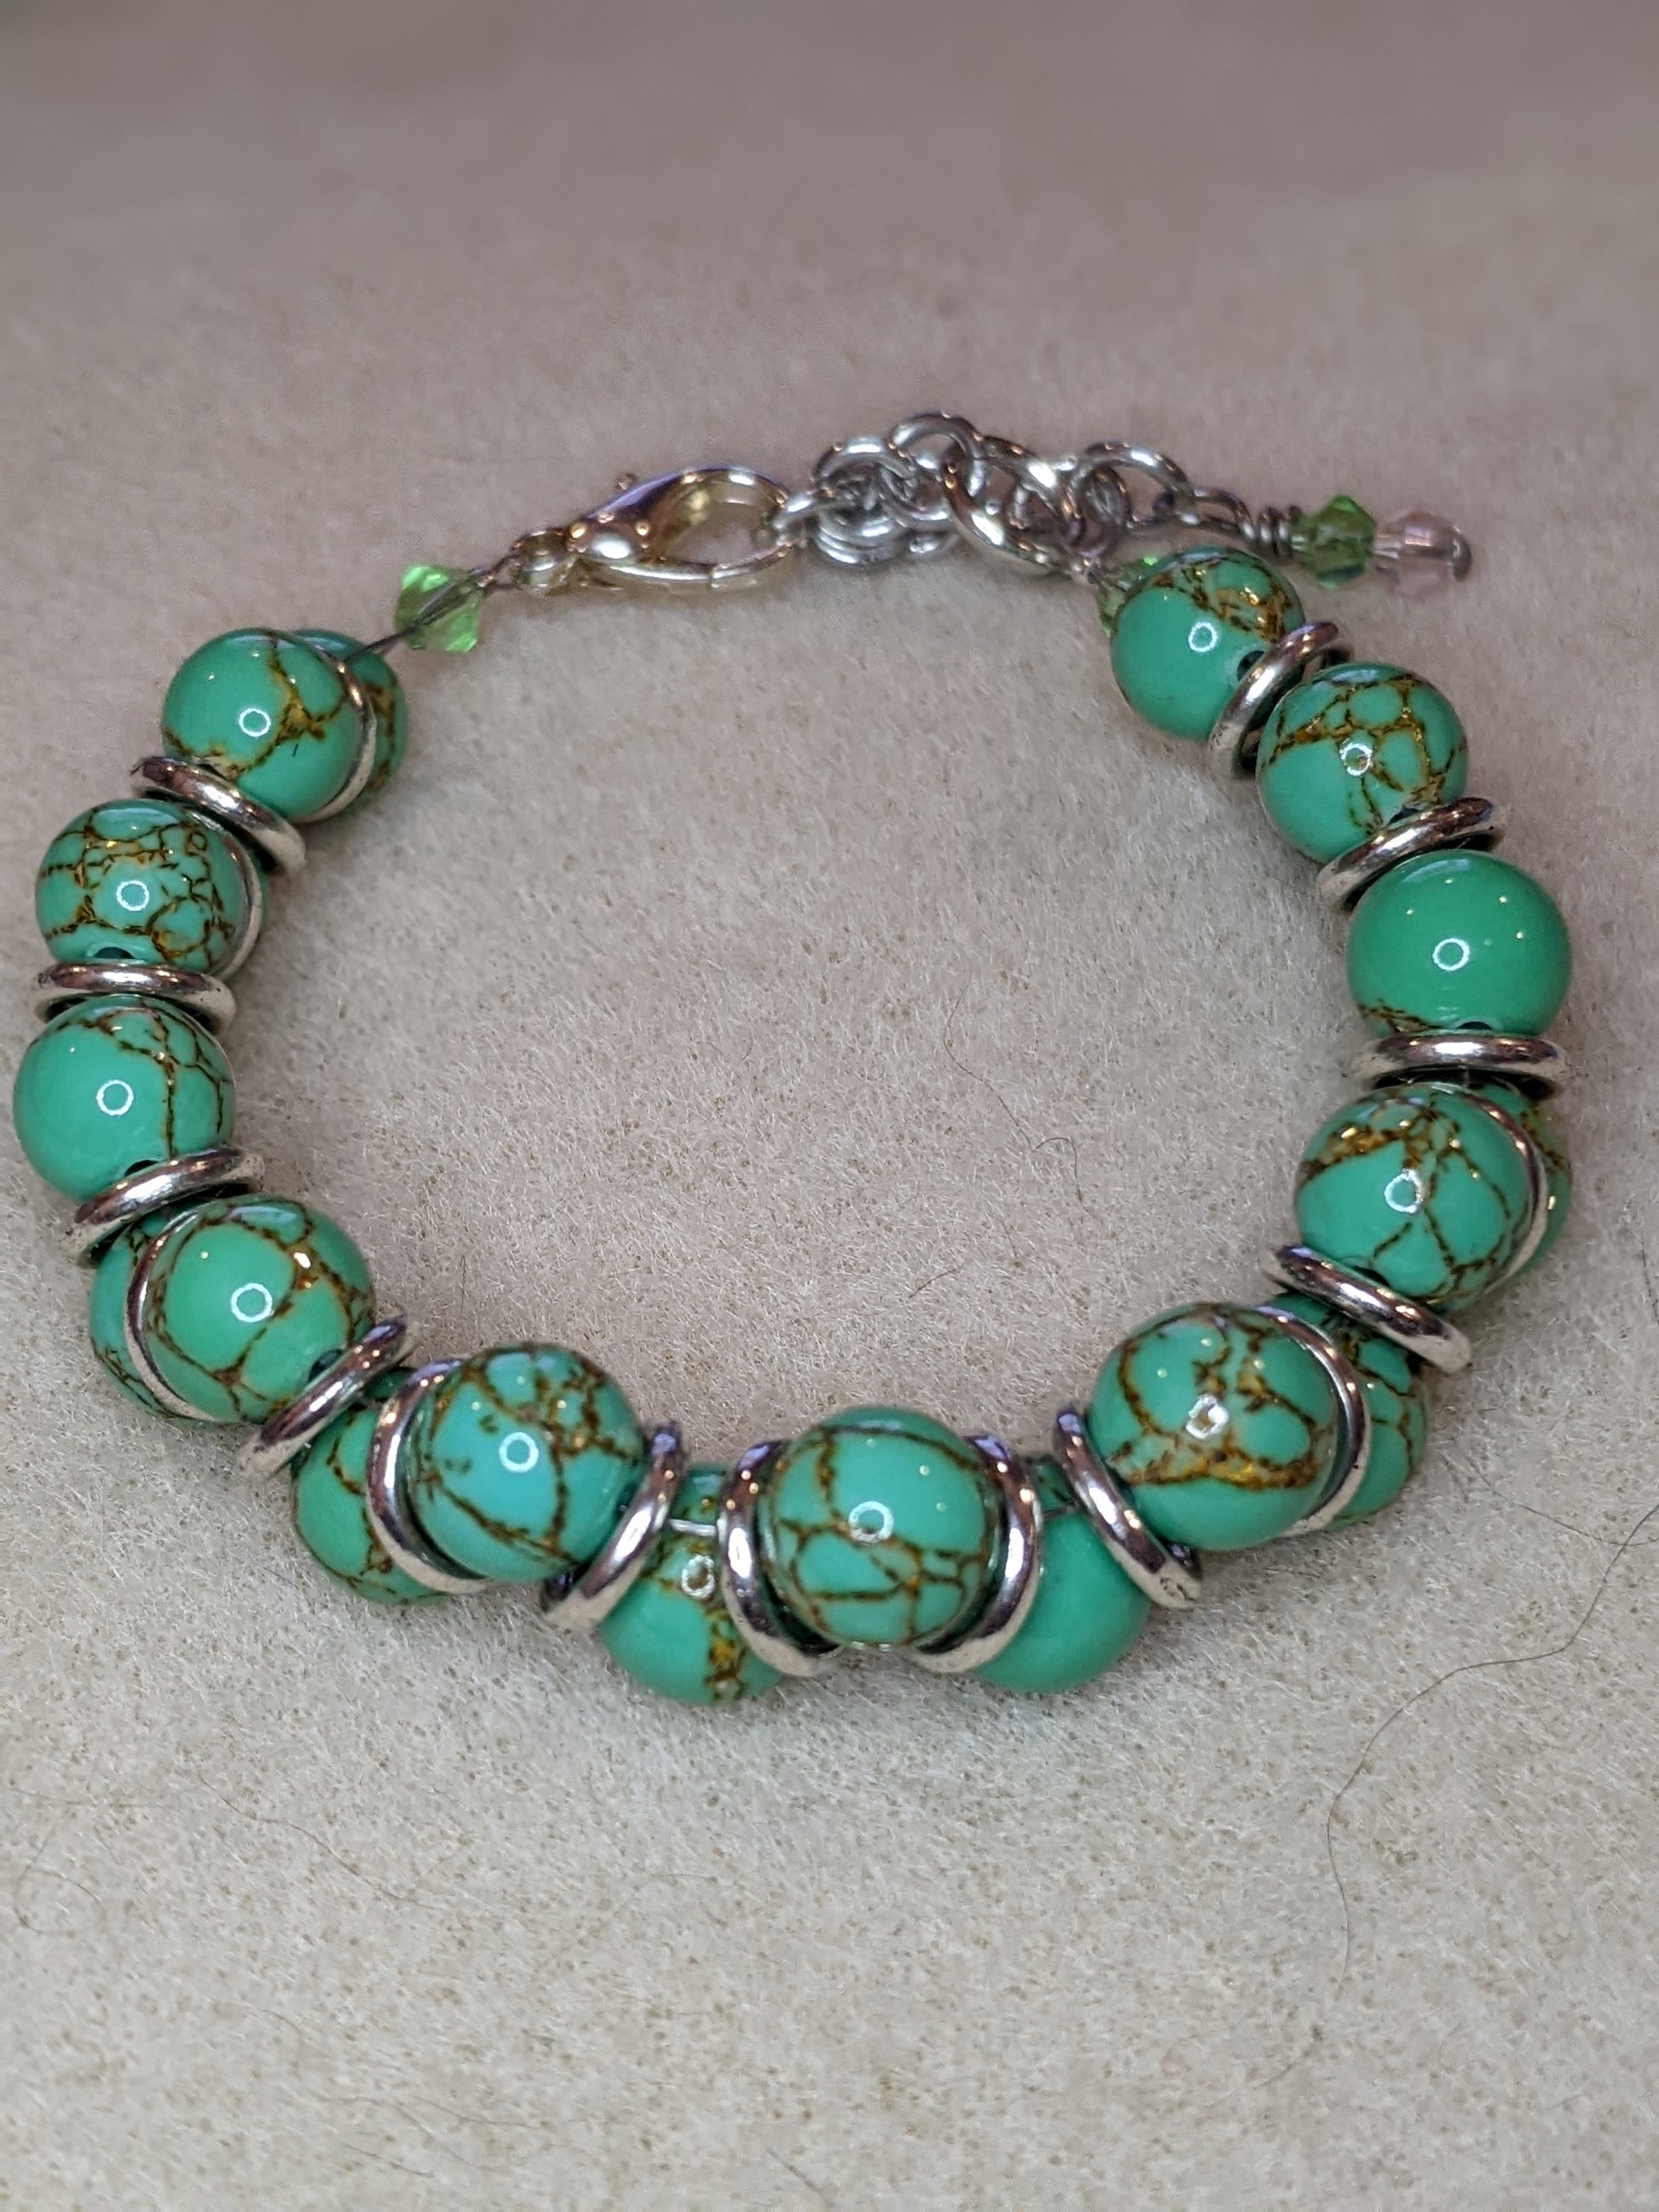 Green ceramic mosaic beaded Goddess style bracelet.  Beads are green ceramic with copper vening